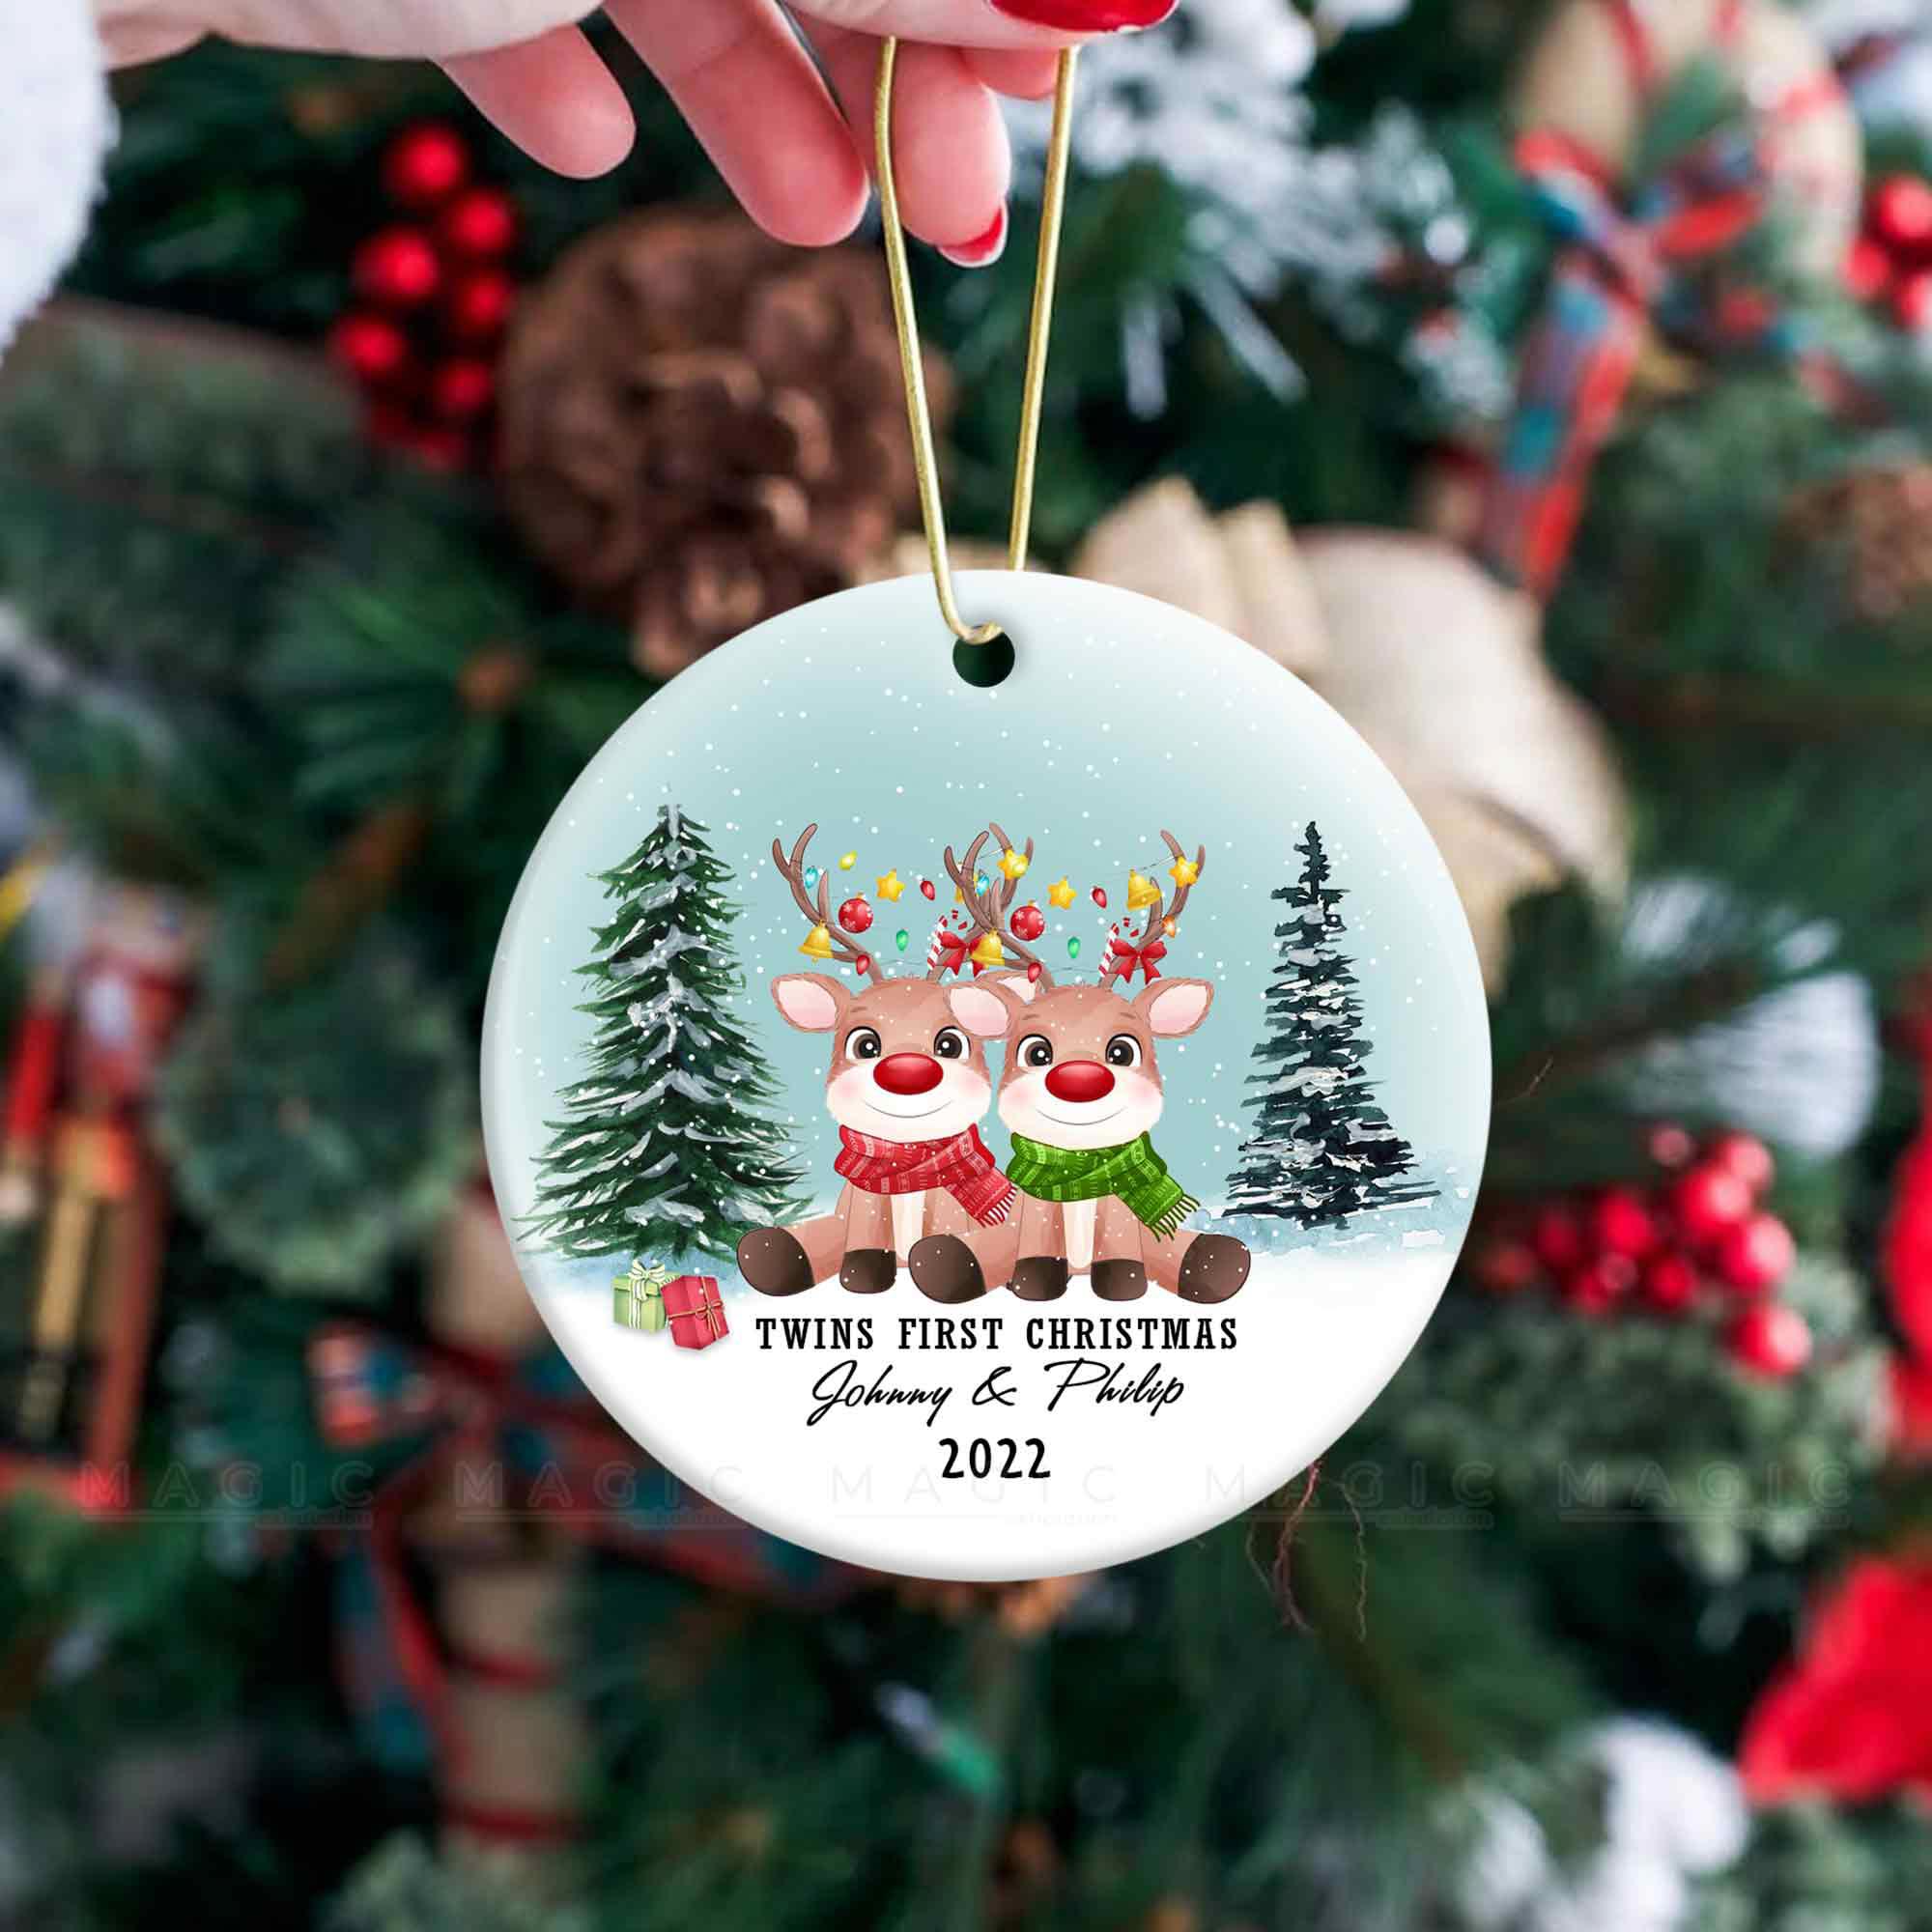 twins first christmas ornament